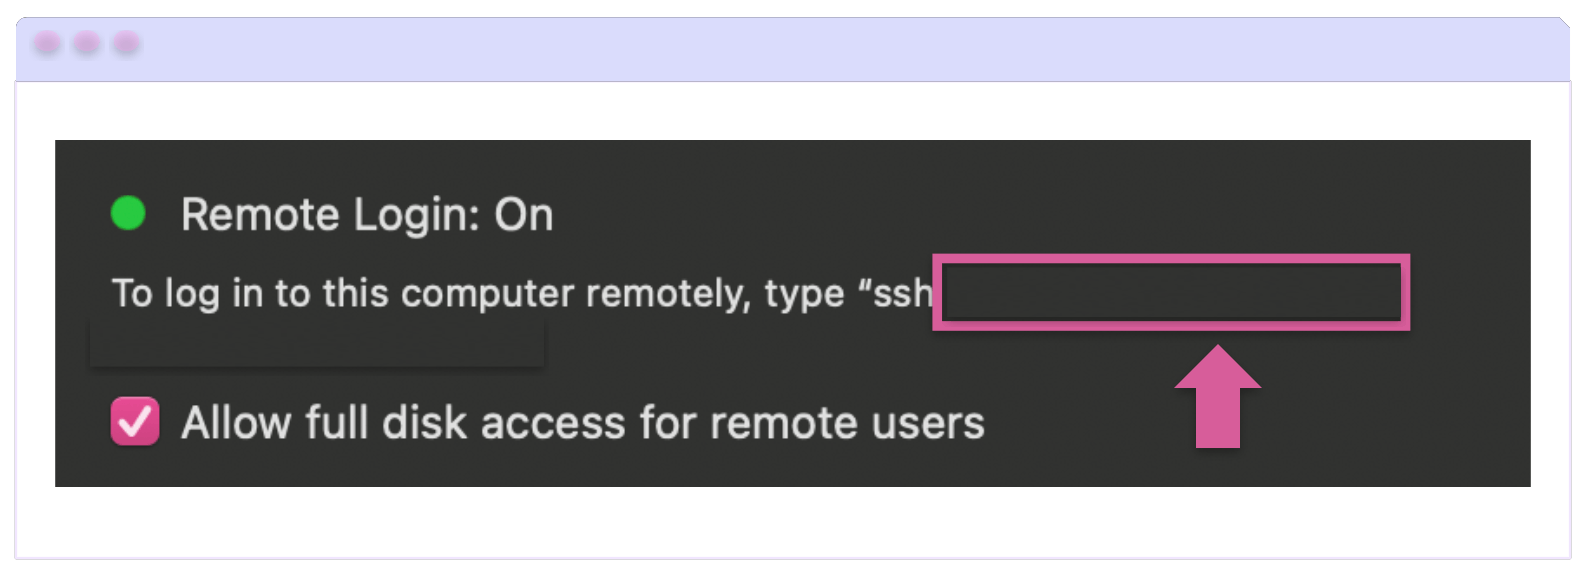 In the Remote Login: On section, just above the checkbox for ‘Allow full disk access’ is the text: To log in to this computer remotely, type “ssh….” Where your address would be.